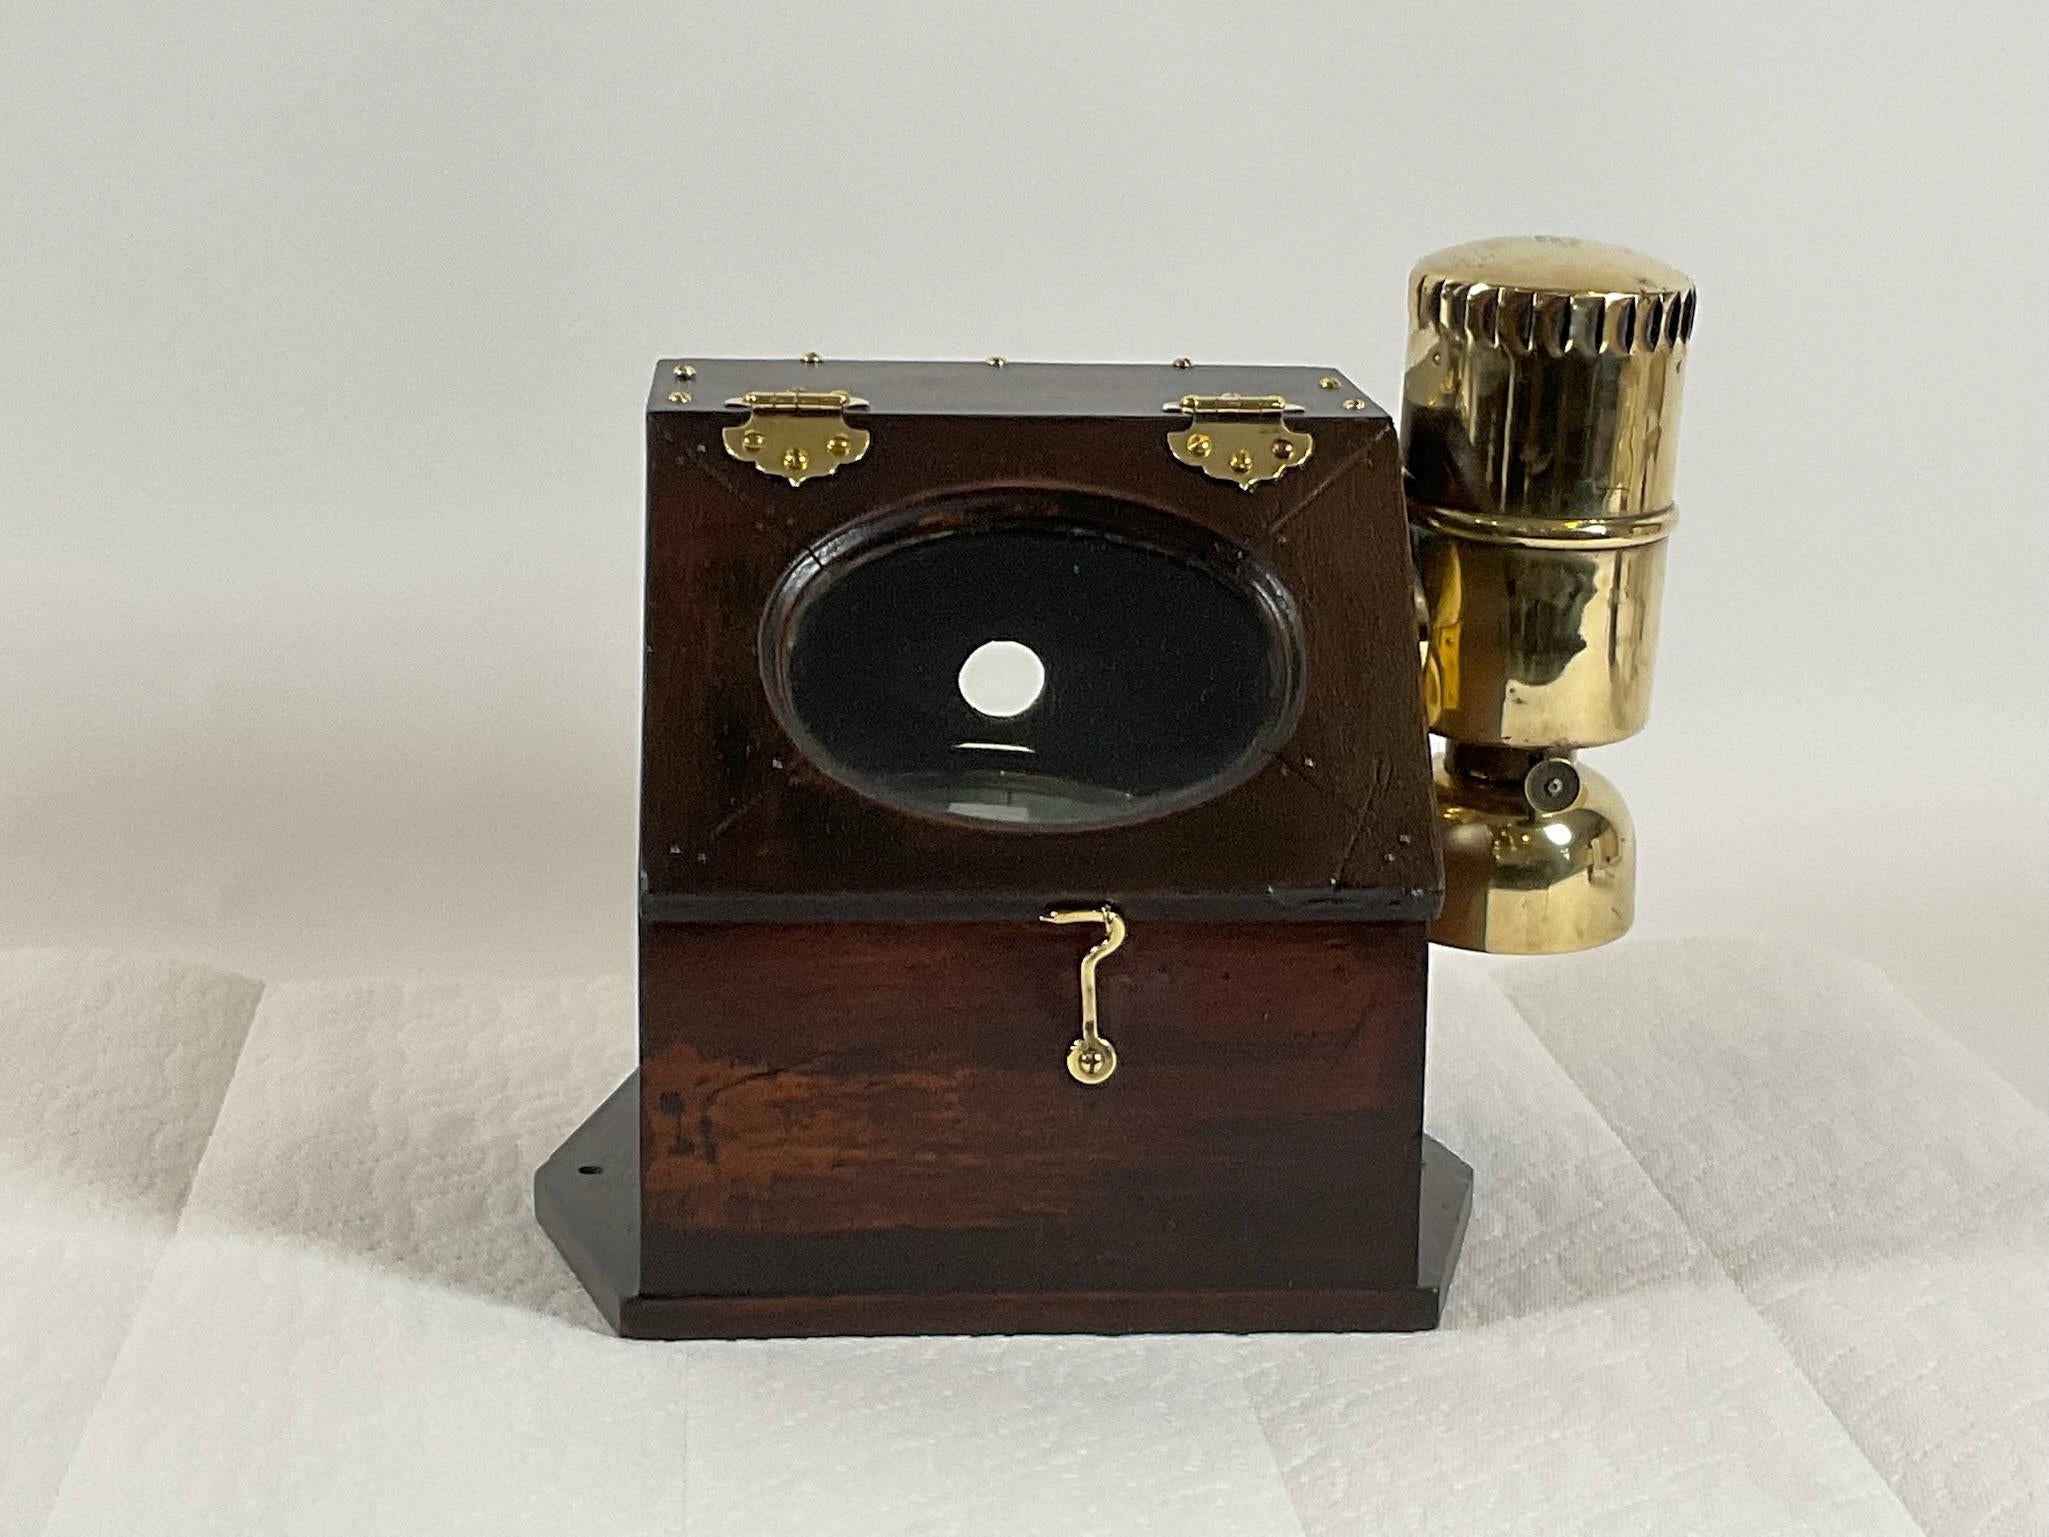 North American Boat Binnacle Compass from the 19th Century For Sale